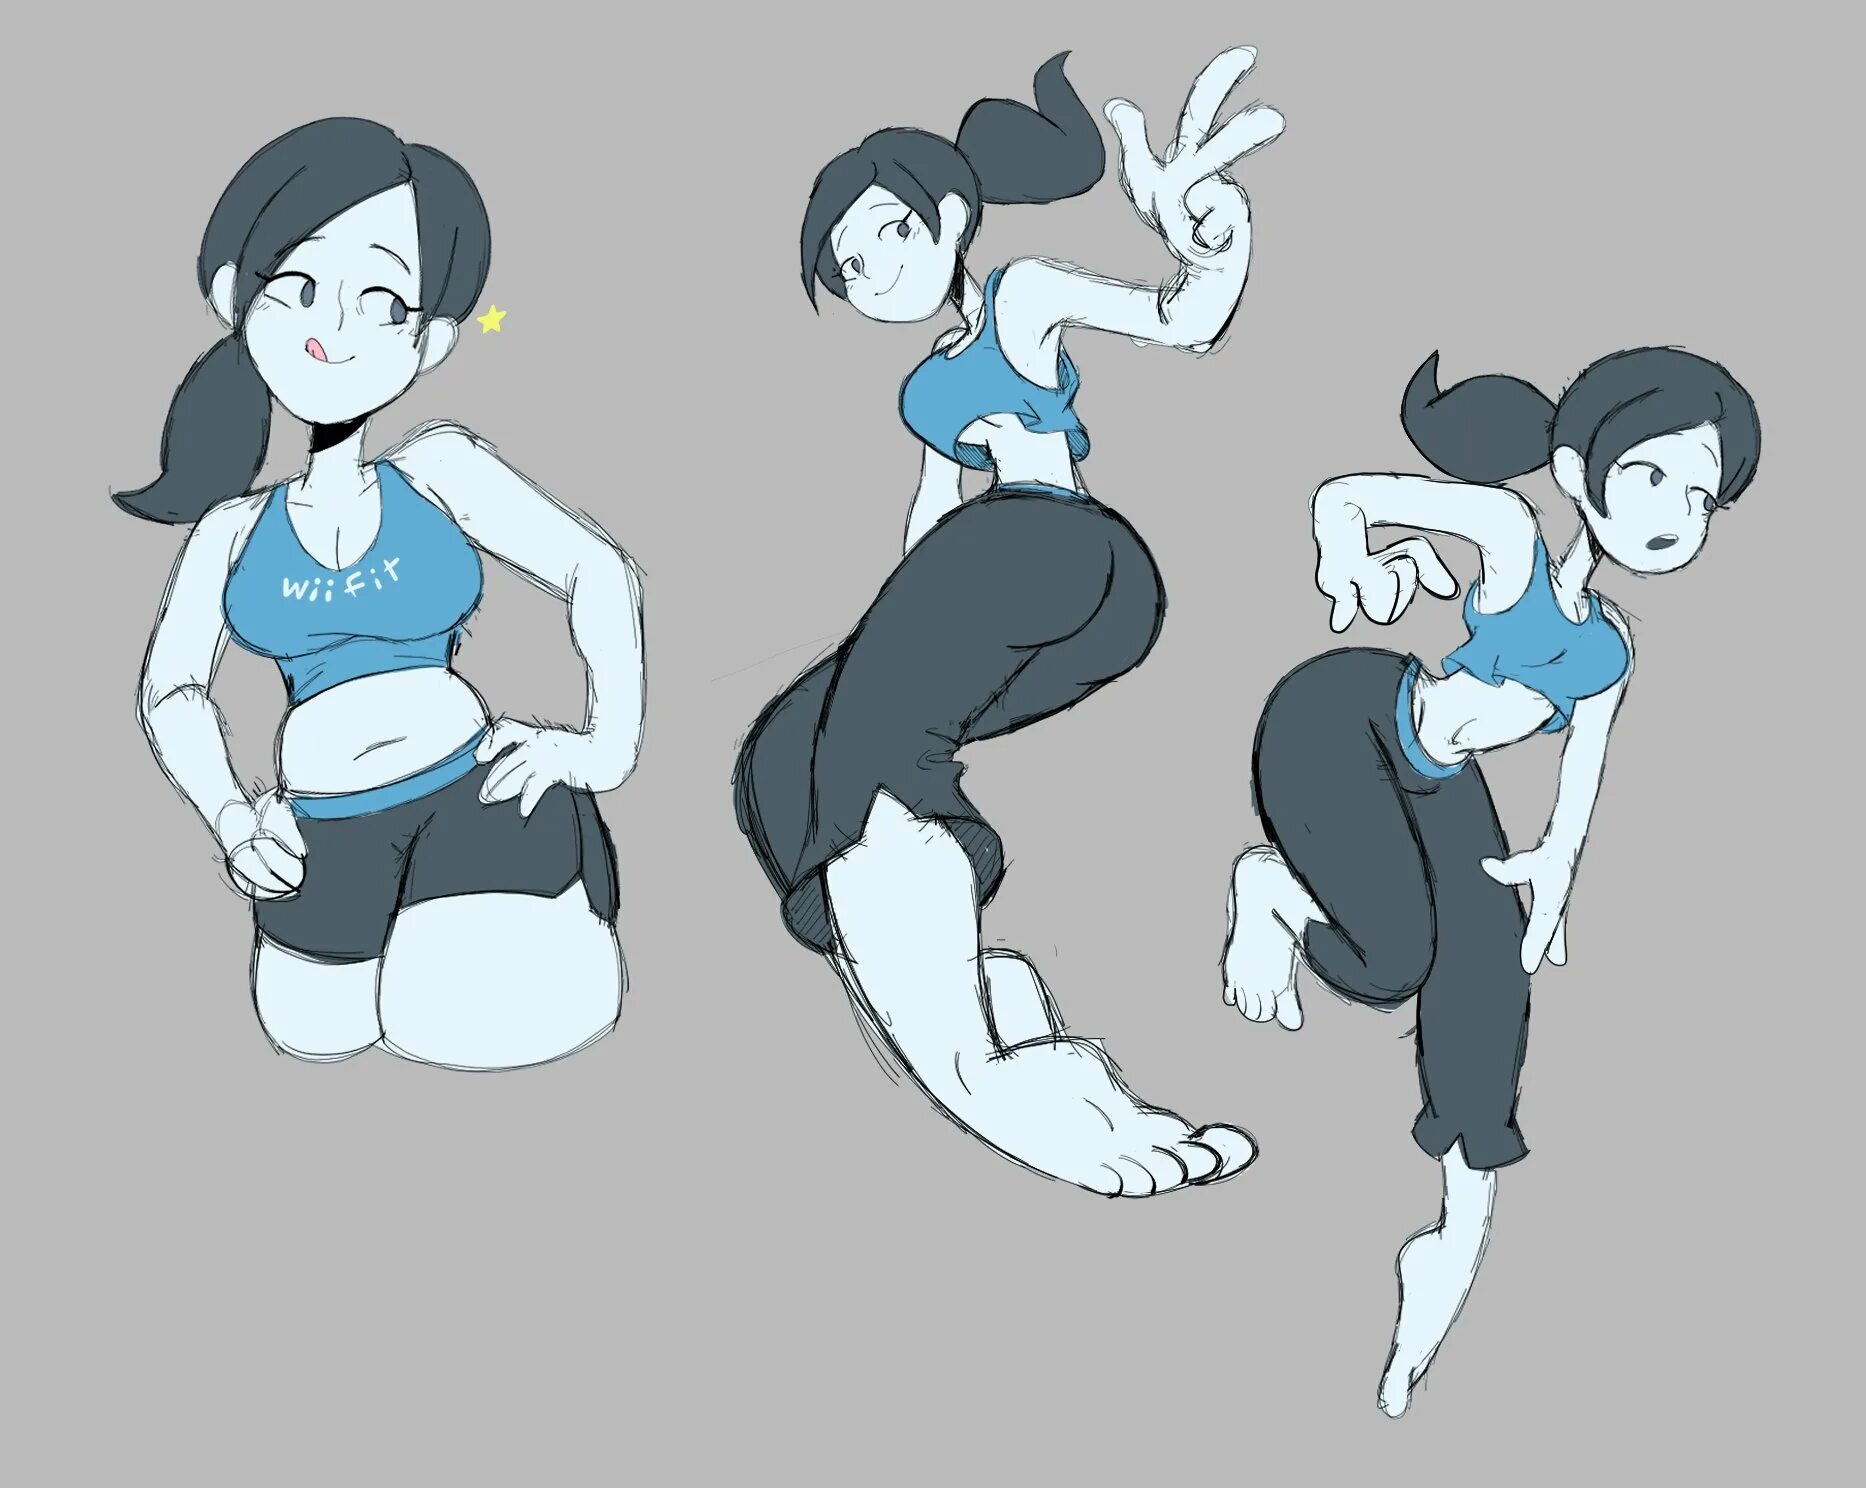 Wii Fit Trainer 34 giant. Wii Fit belly. Wii Fit Trainer 34 giant Vore. Wii Fit Trainer belly.